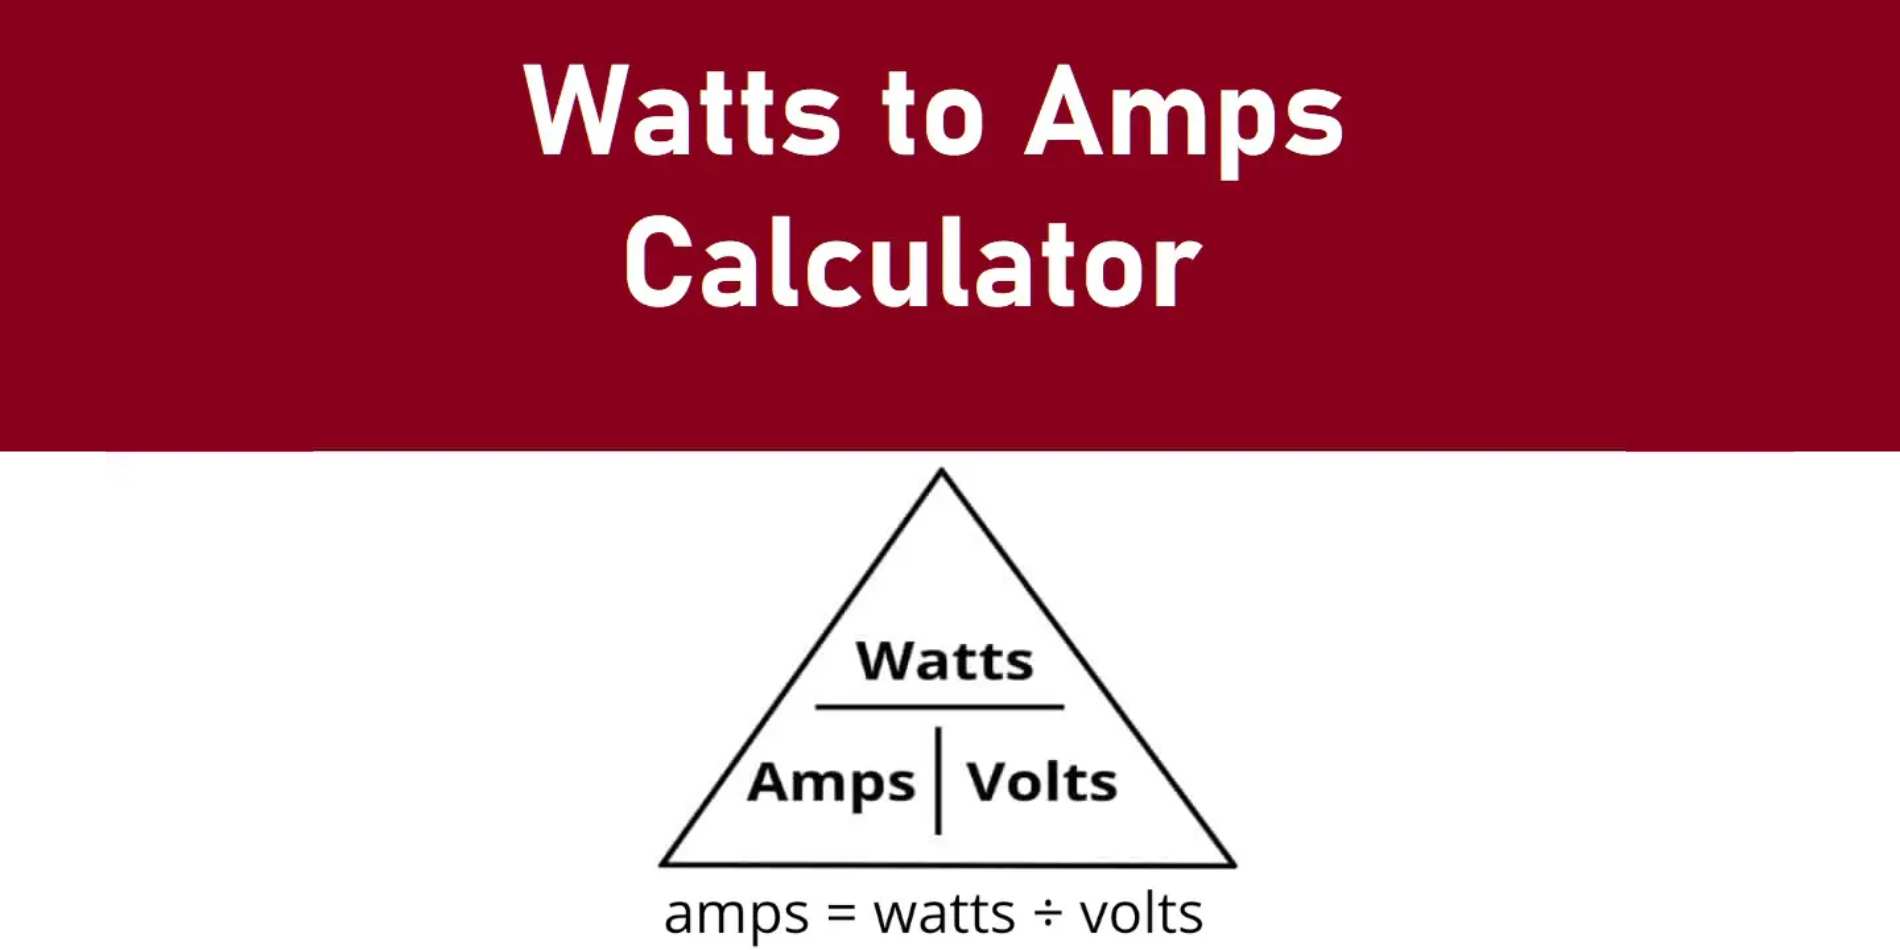 Watts to Amps Conversion — Amps = Watts ÷ Volts